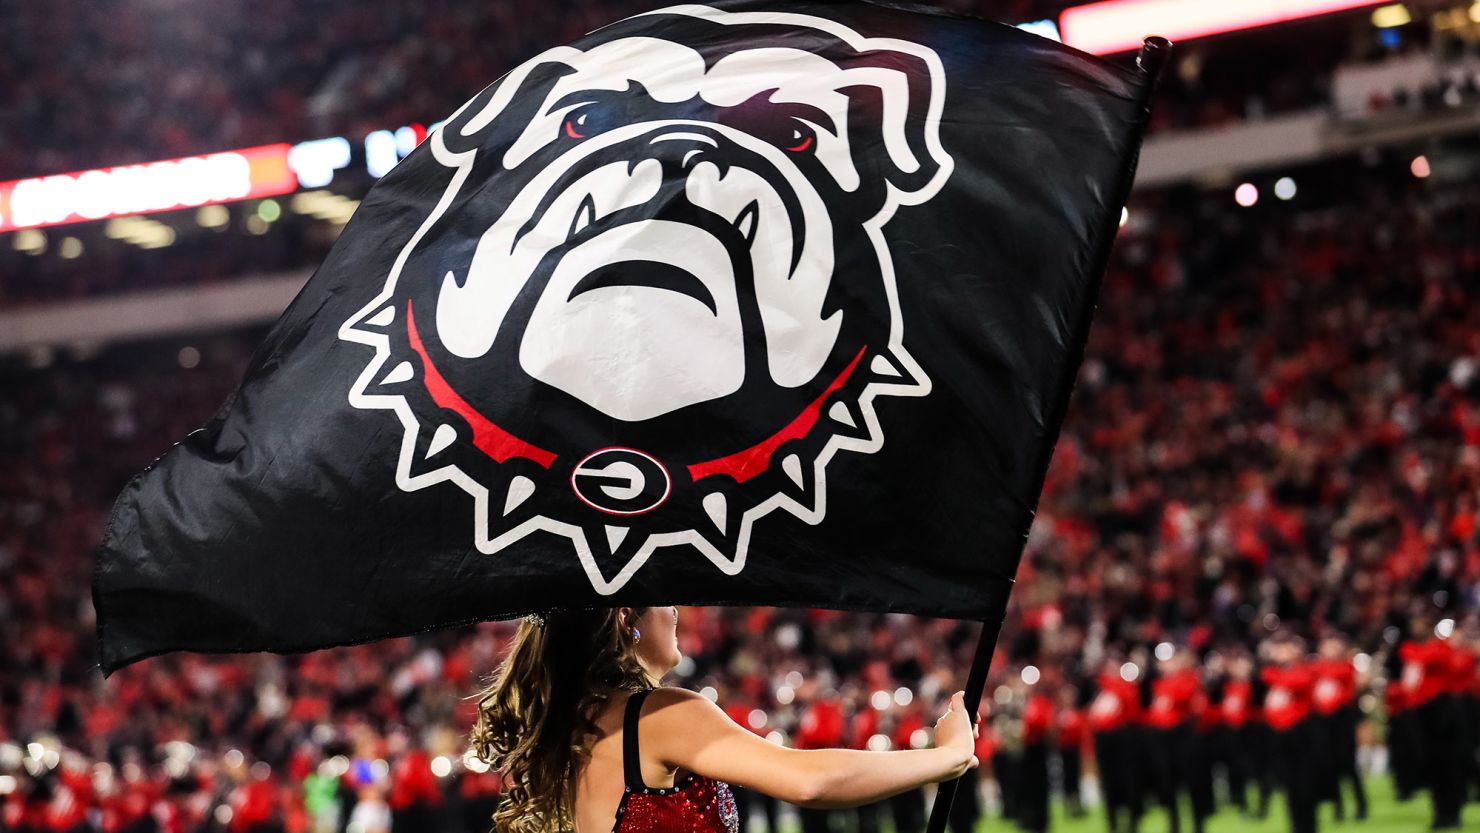 The Georgia Redcoat Marching Band performs on the field during a game between the Georgia Bulldogs and the Missouri Tigers at Sanford Stadium on November 9, 2019 in Athens, Georgia.